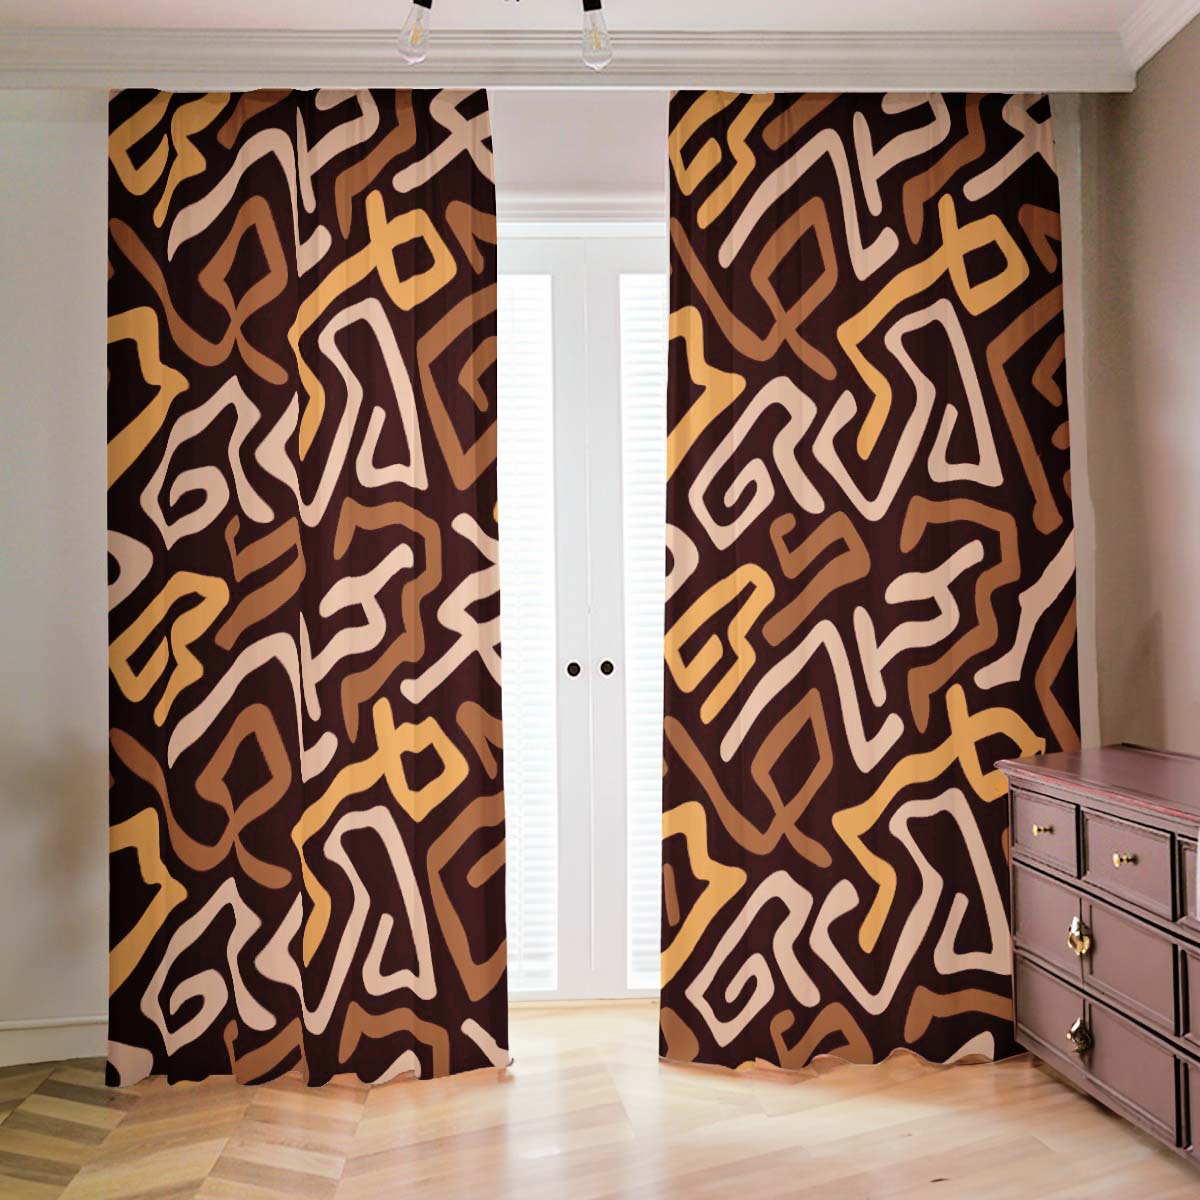 African Print Curtains in Blackout Kuba Print Brown - Bynelo